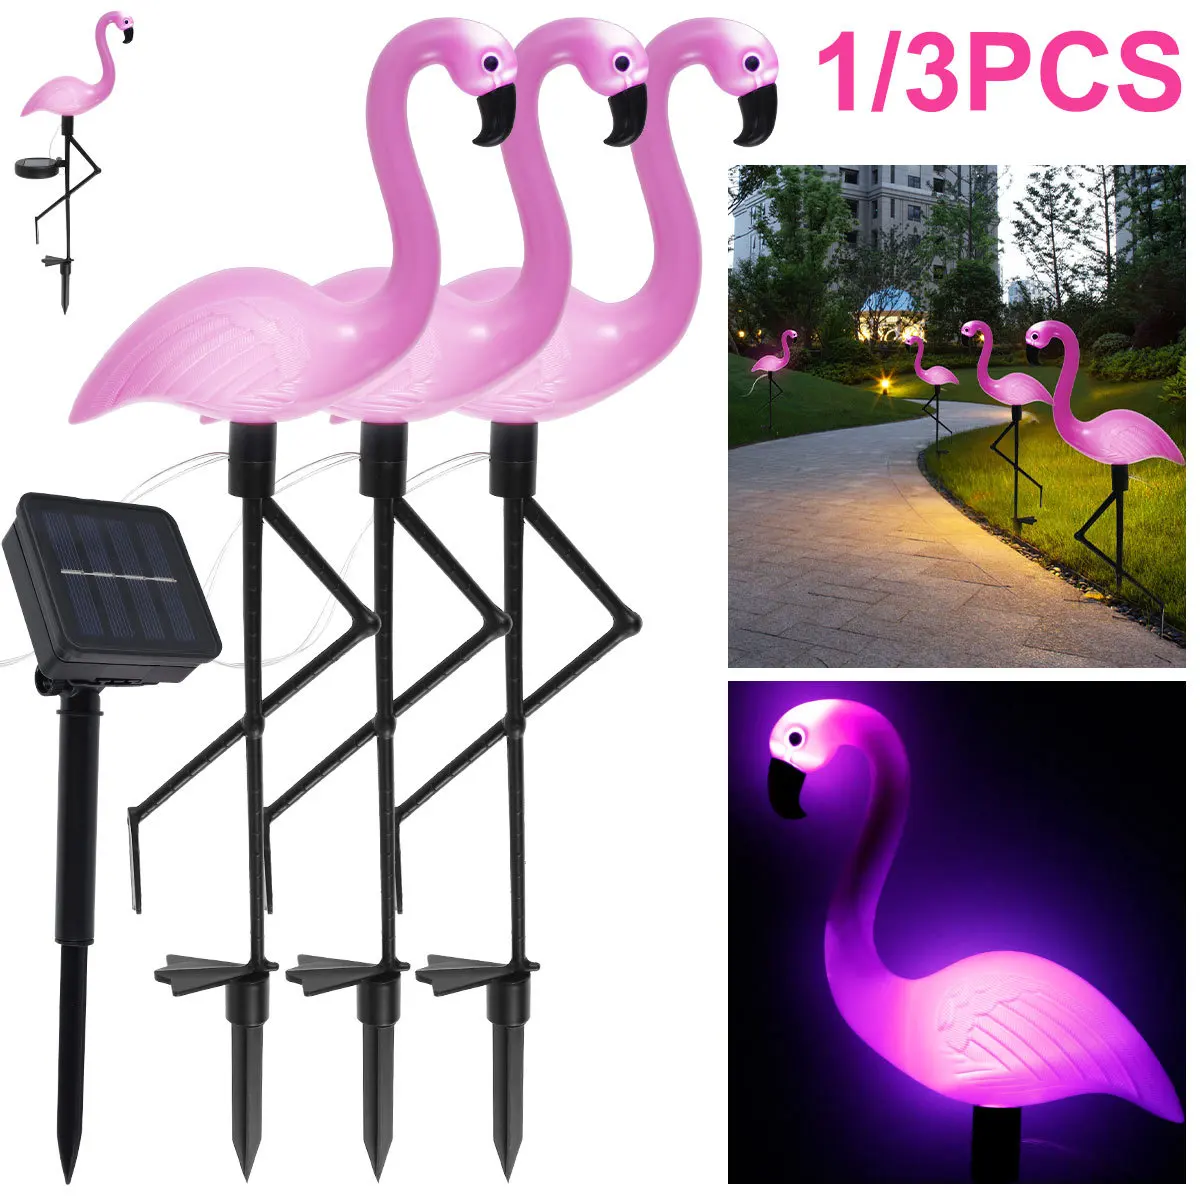 sunlu pla filament 0 75kg mini spool 3pcs lot light and frugal 3d printing materials filament high strength and biodegradable 3PCS Flamingo Solar Light IP55 Waterproof LED Pink Flamingo Stake Light Landscape Ground Lamp for Outdoor Pathway Garden Decor